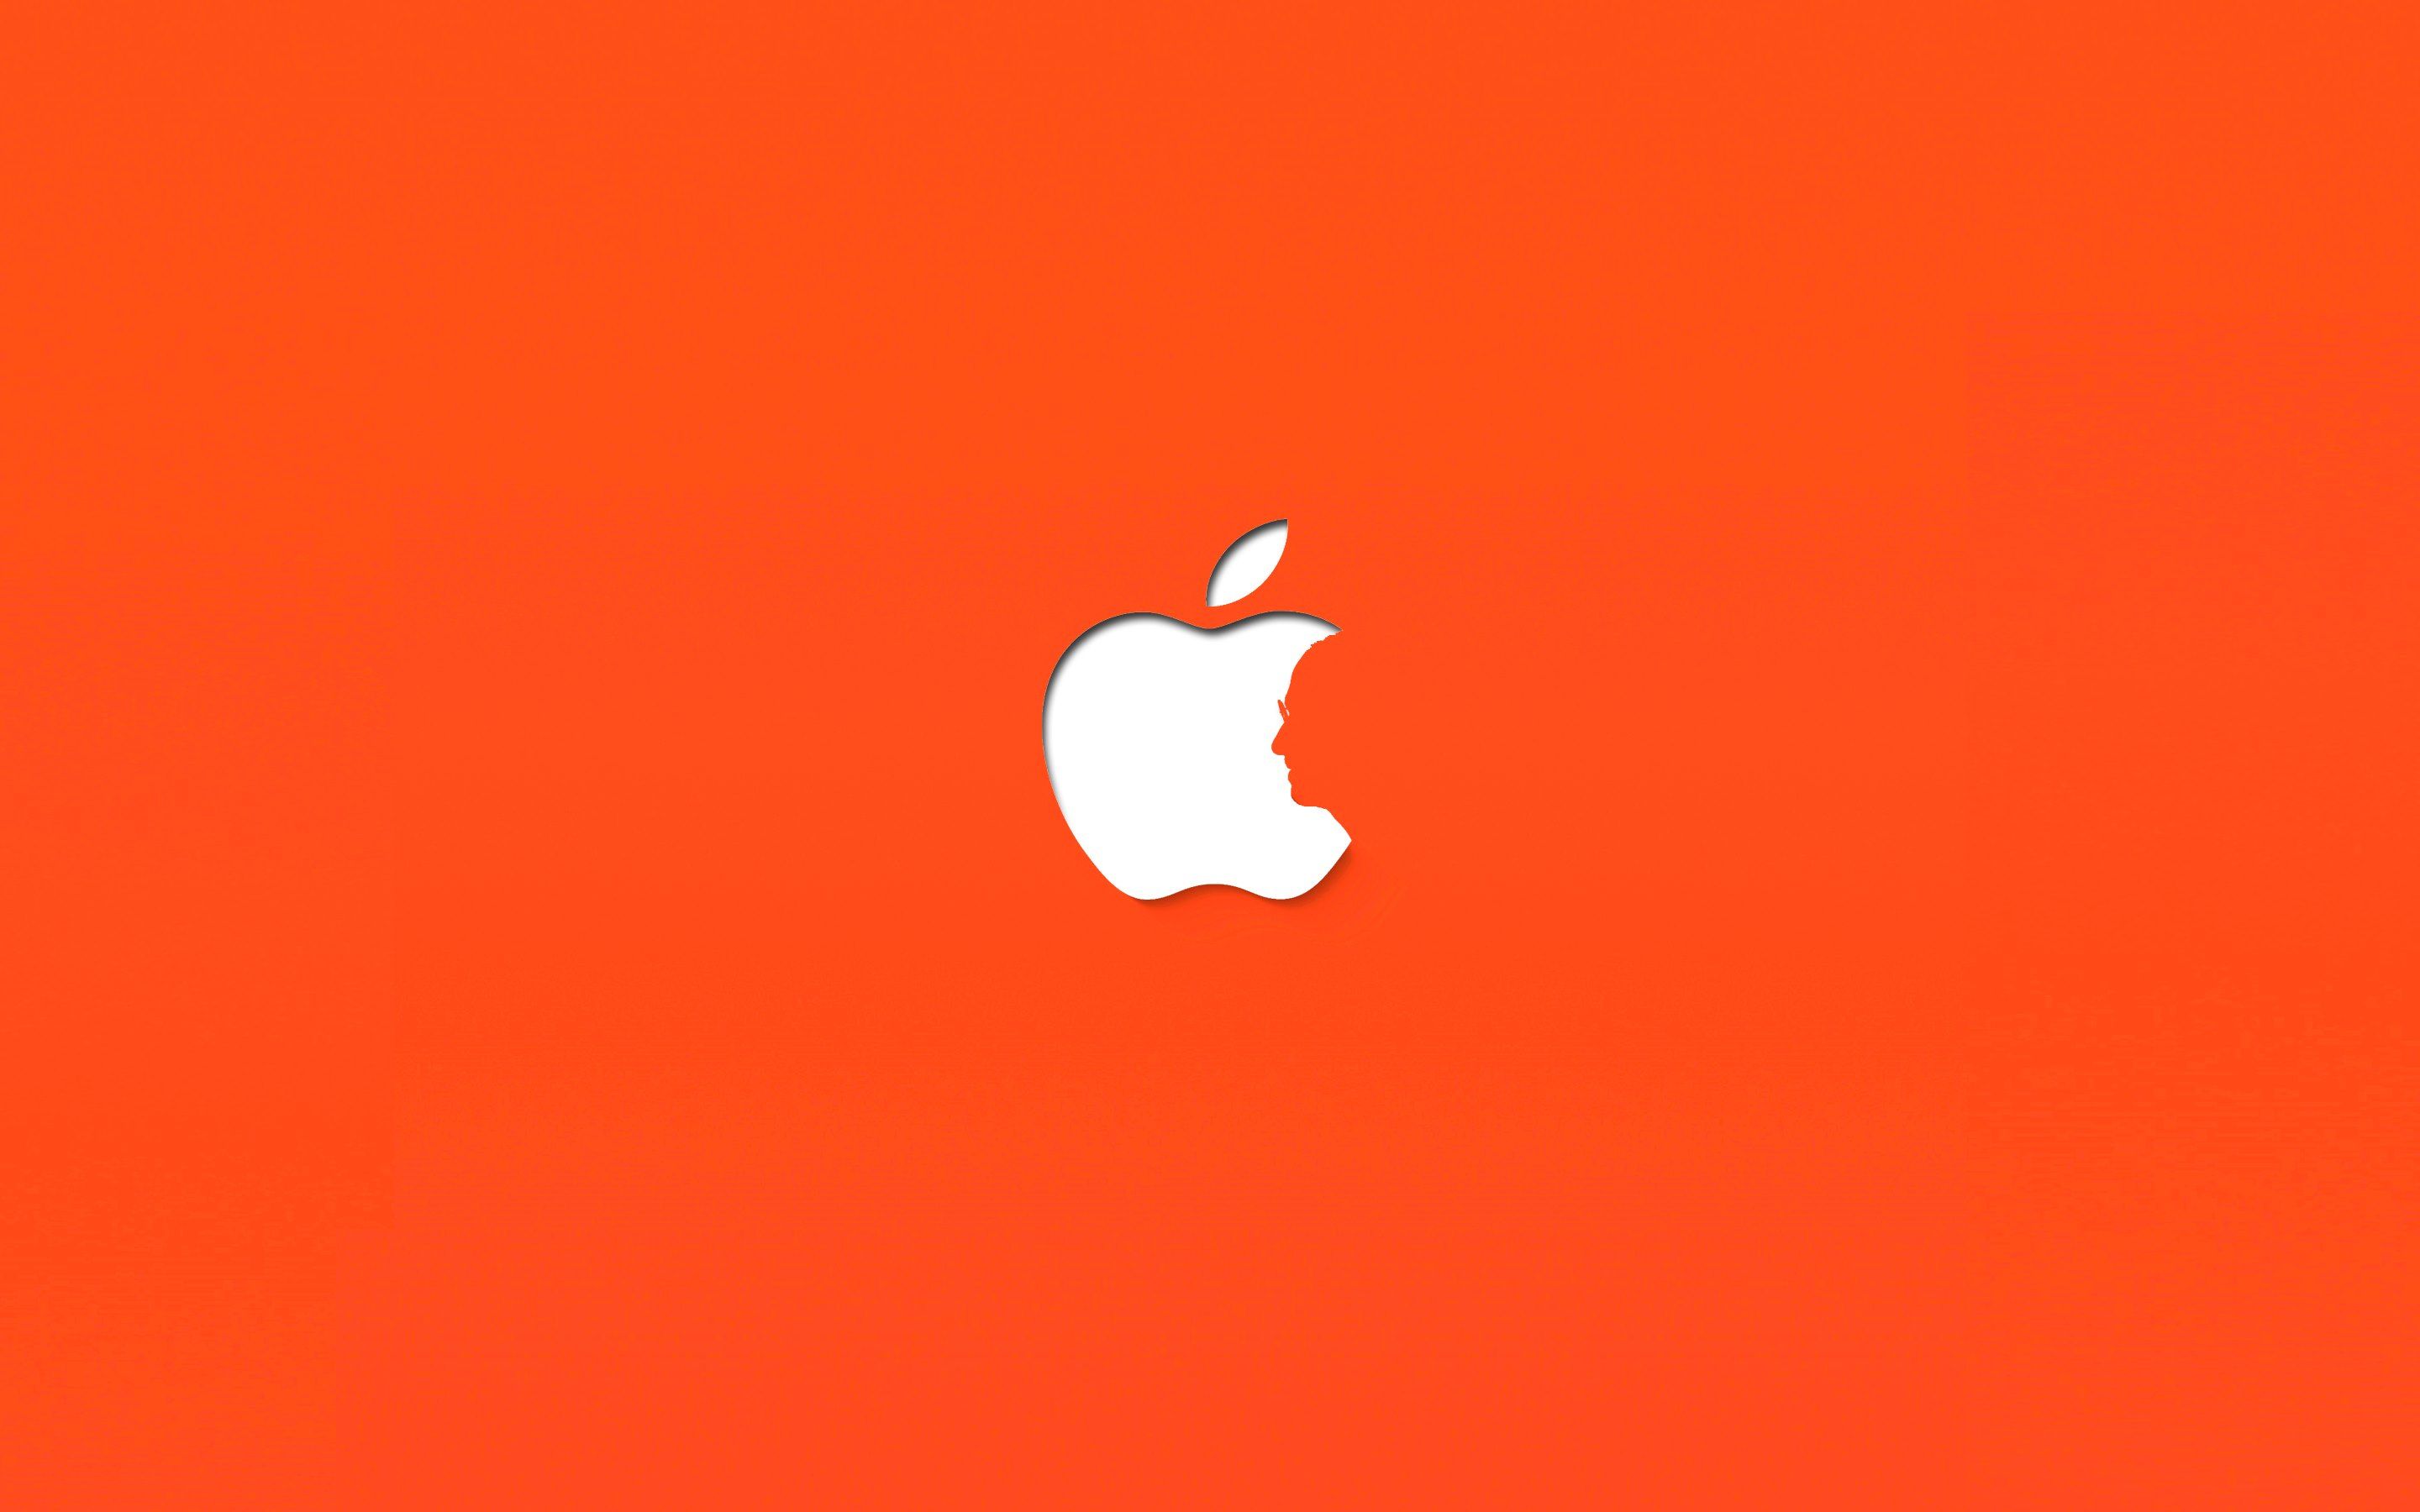 Stylish Minimal Design Inspired by Apple HD Wallpapers. 4K Wallpapers